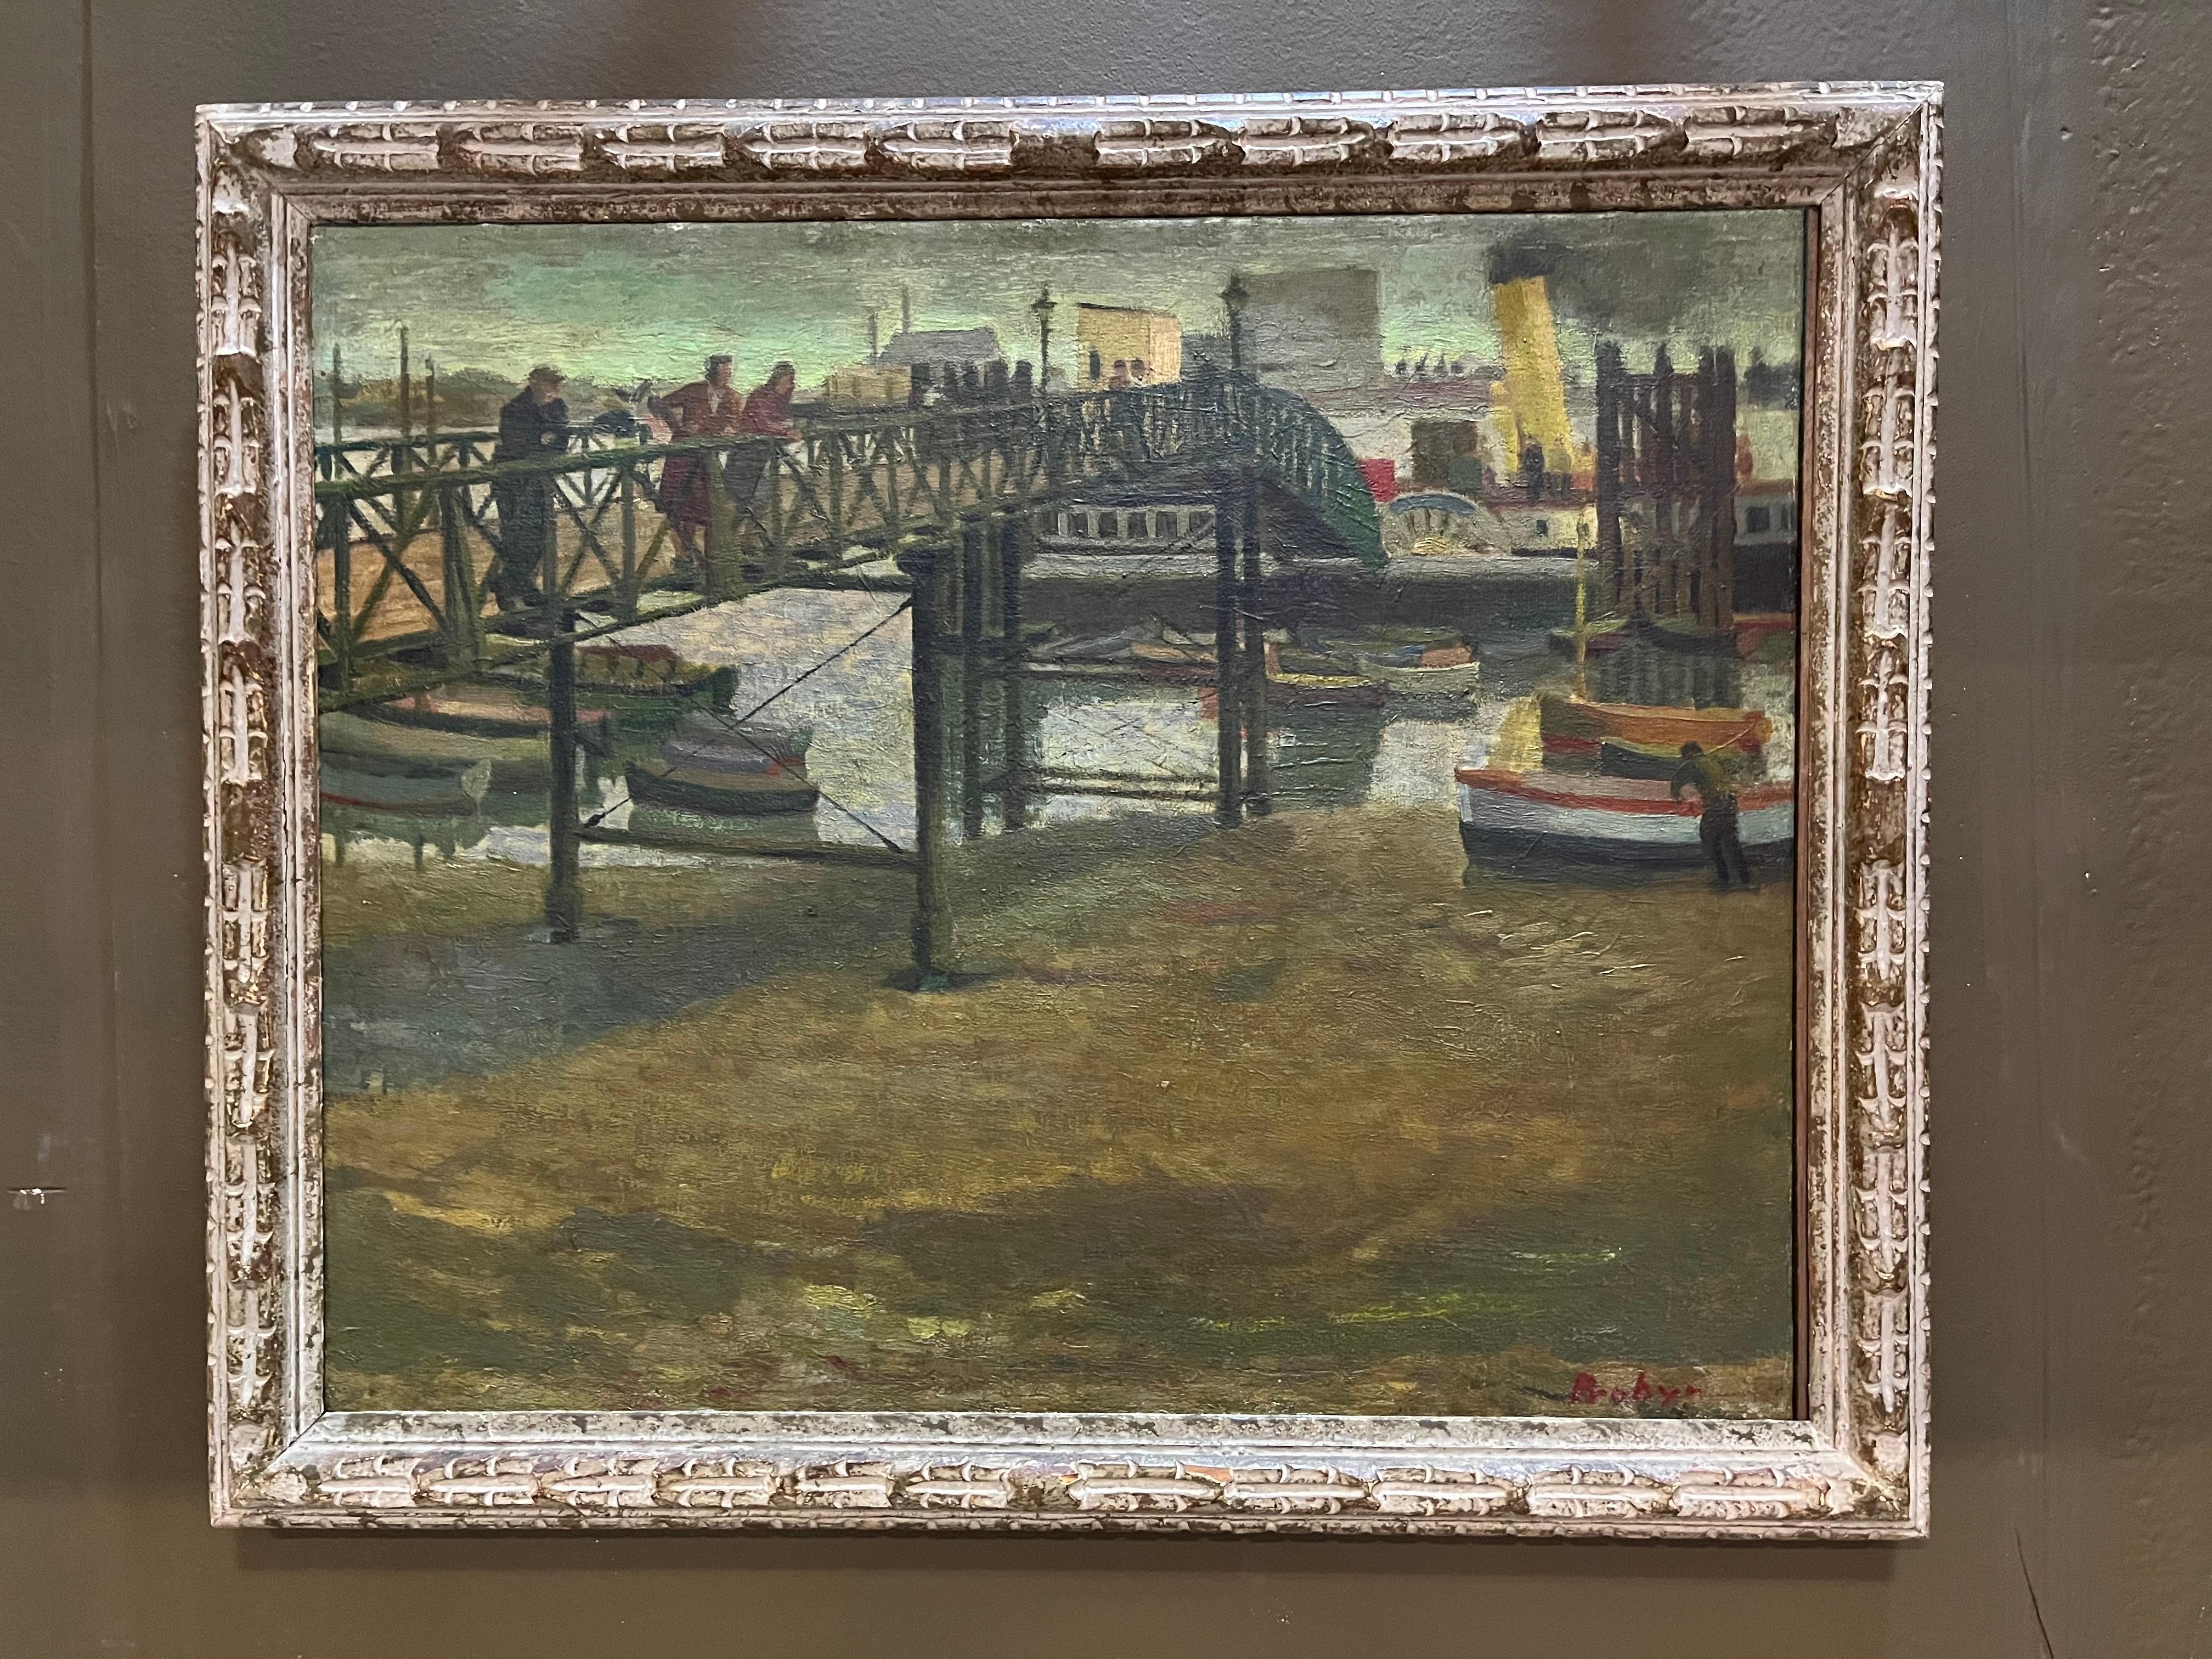 Fabulous 1950’s oil on canvas painting depicting the Medway Queen paddle steamer. Celebrating its centenary this year. The Medway played an important role during WW11 doing 7 journeys to Dunkirk to rescue British soldiers. Very well executed and